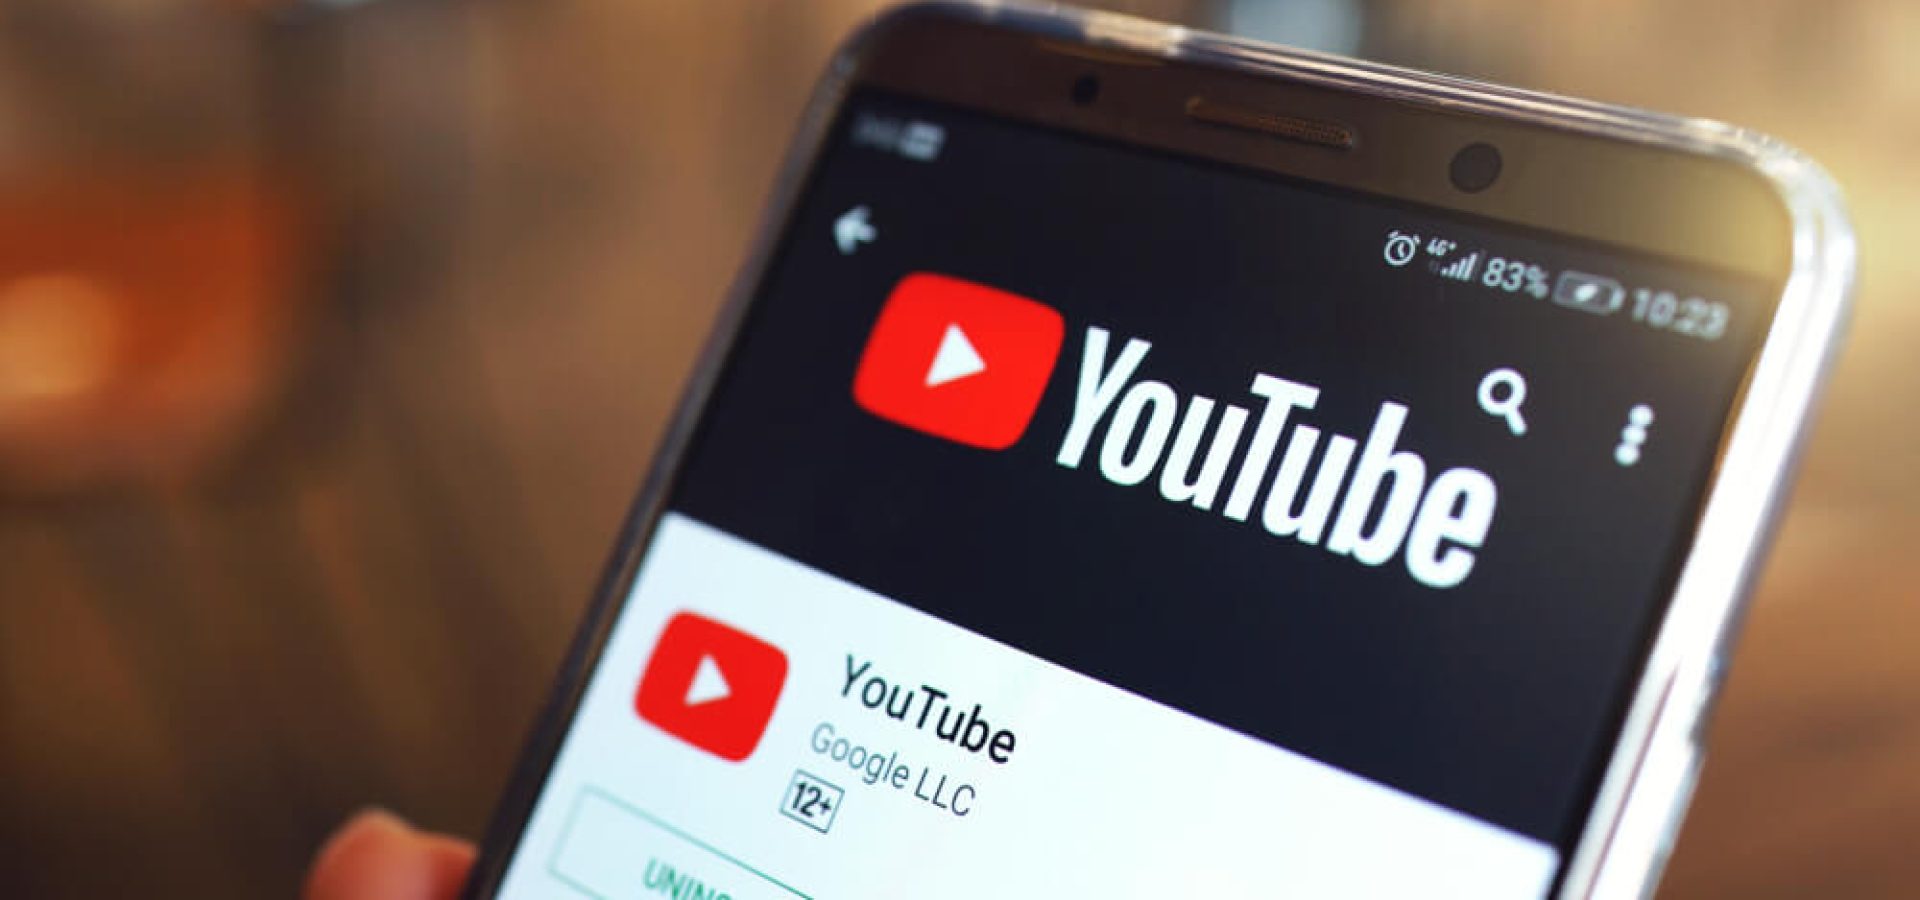 YouTube vice president of government affairs and public policy, the platform will remove politically misleading videos.